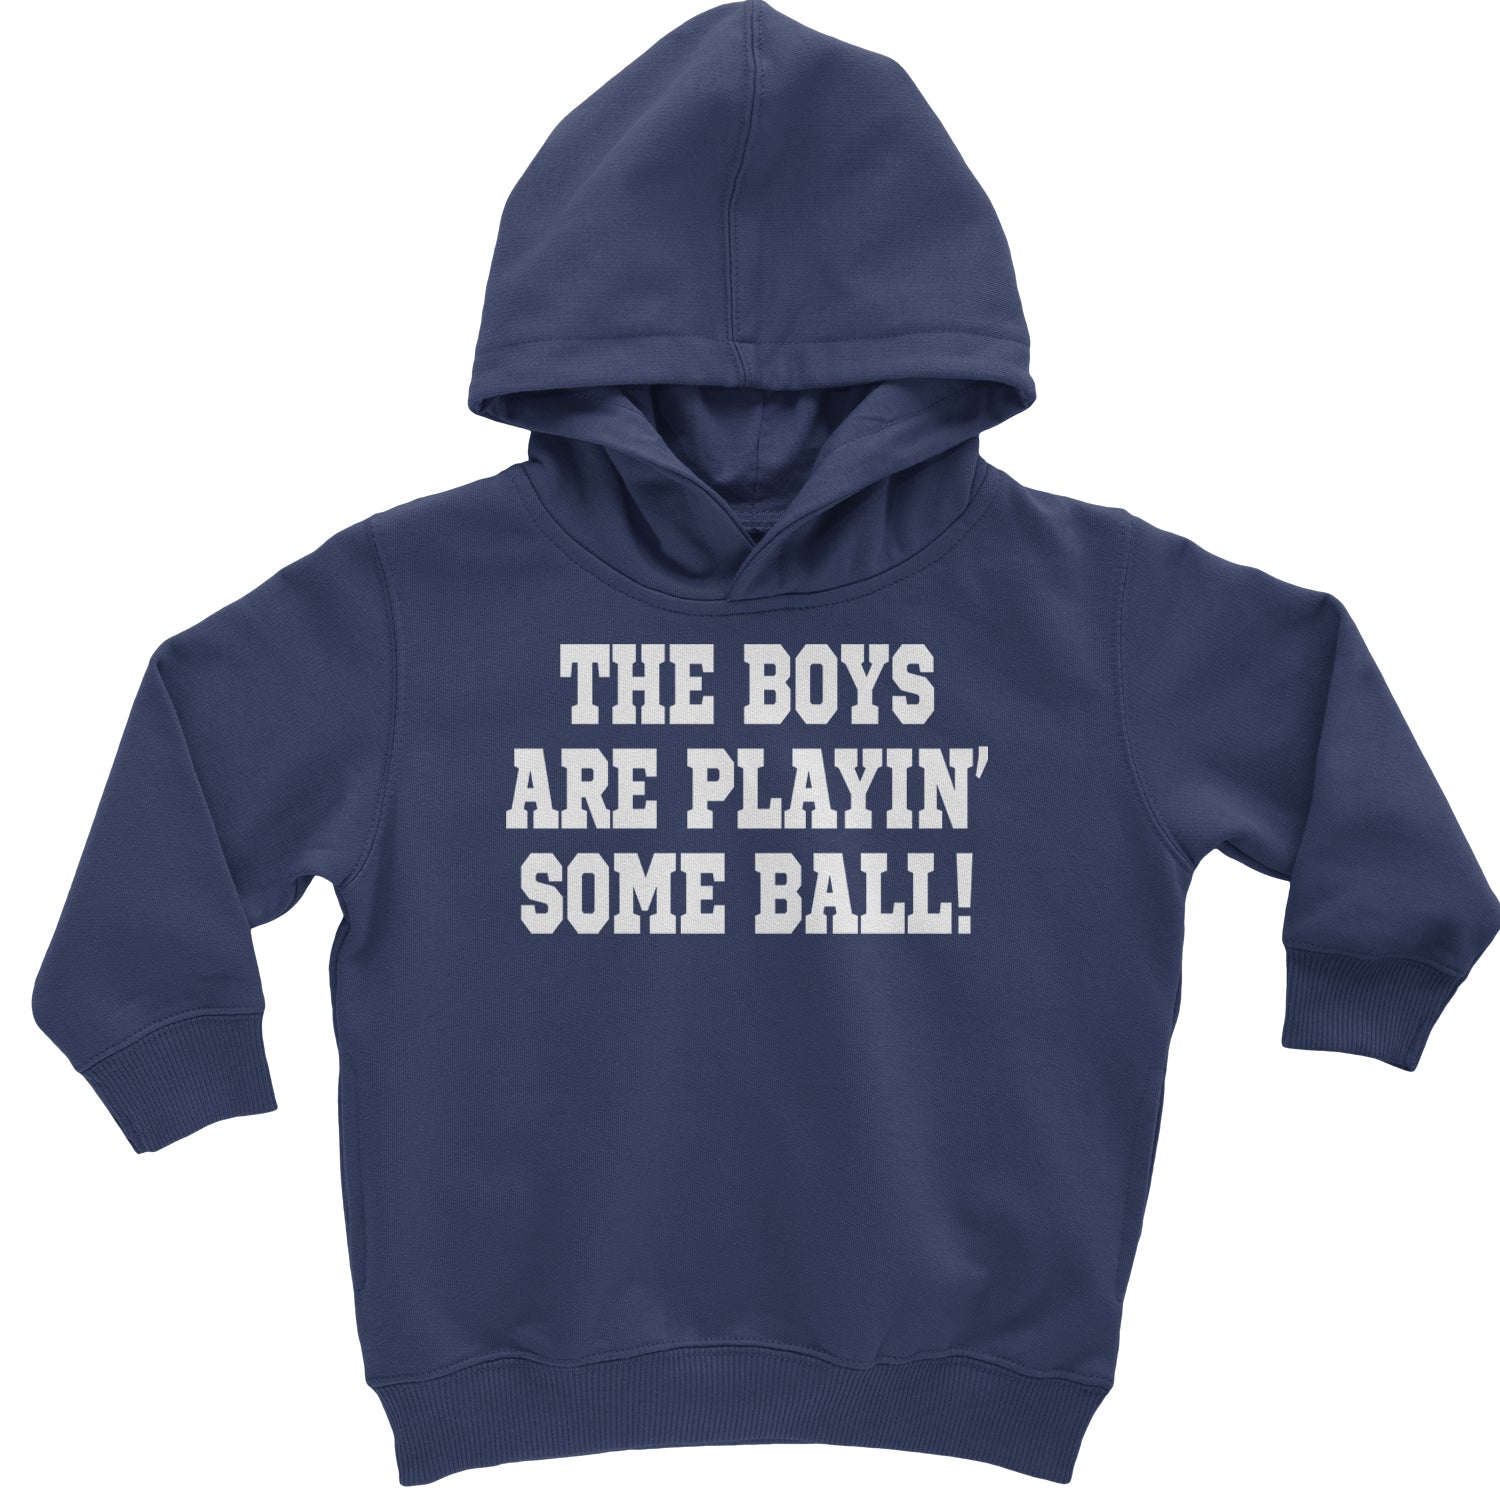 The Boys Are Playing Some Baseball Toddler Hoodie And Infant Fleece Romper